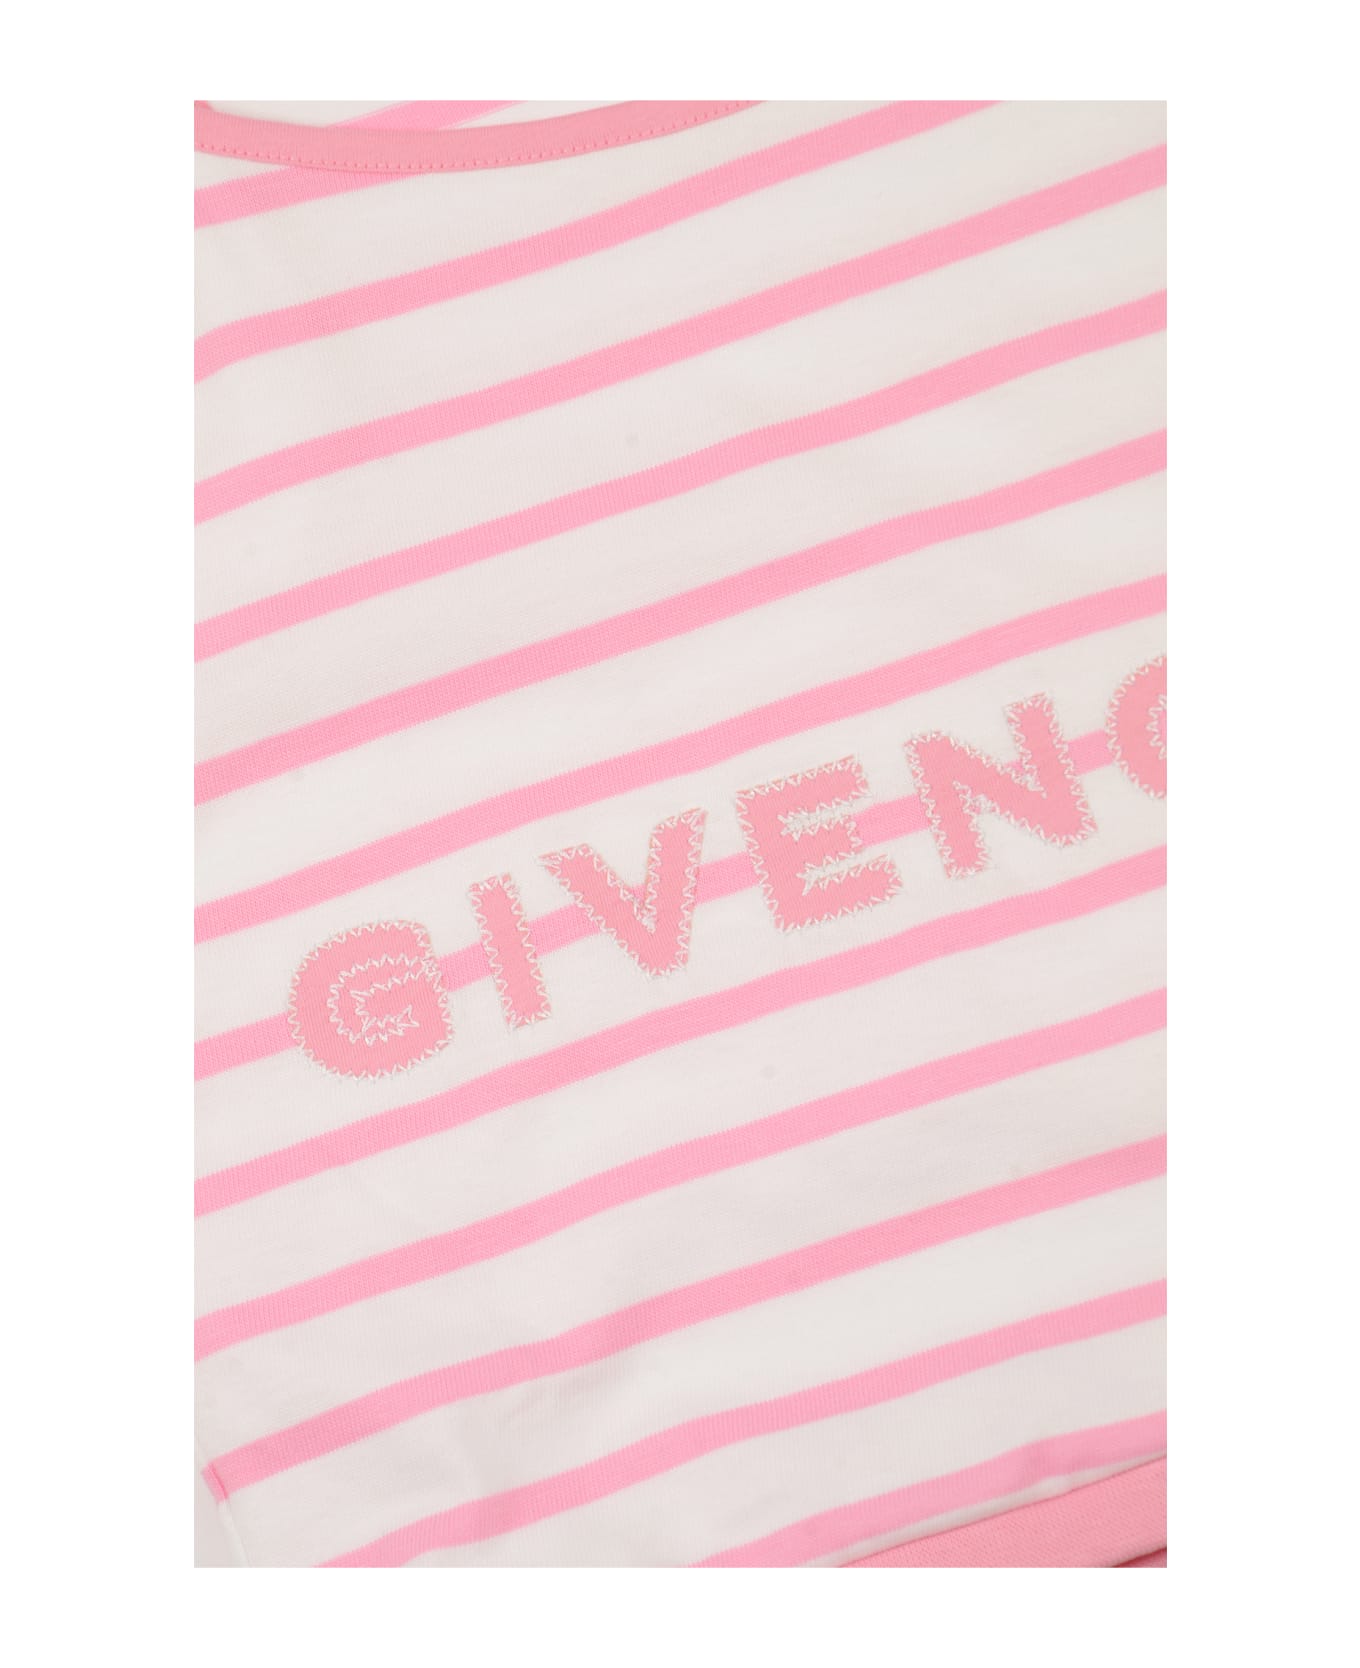 Givenchy Logo Embroidered Stripe Top - White/Pink トップス